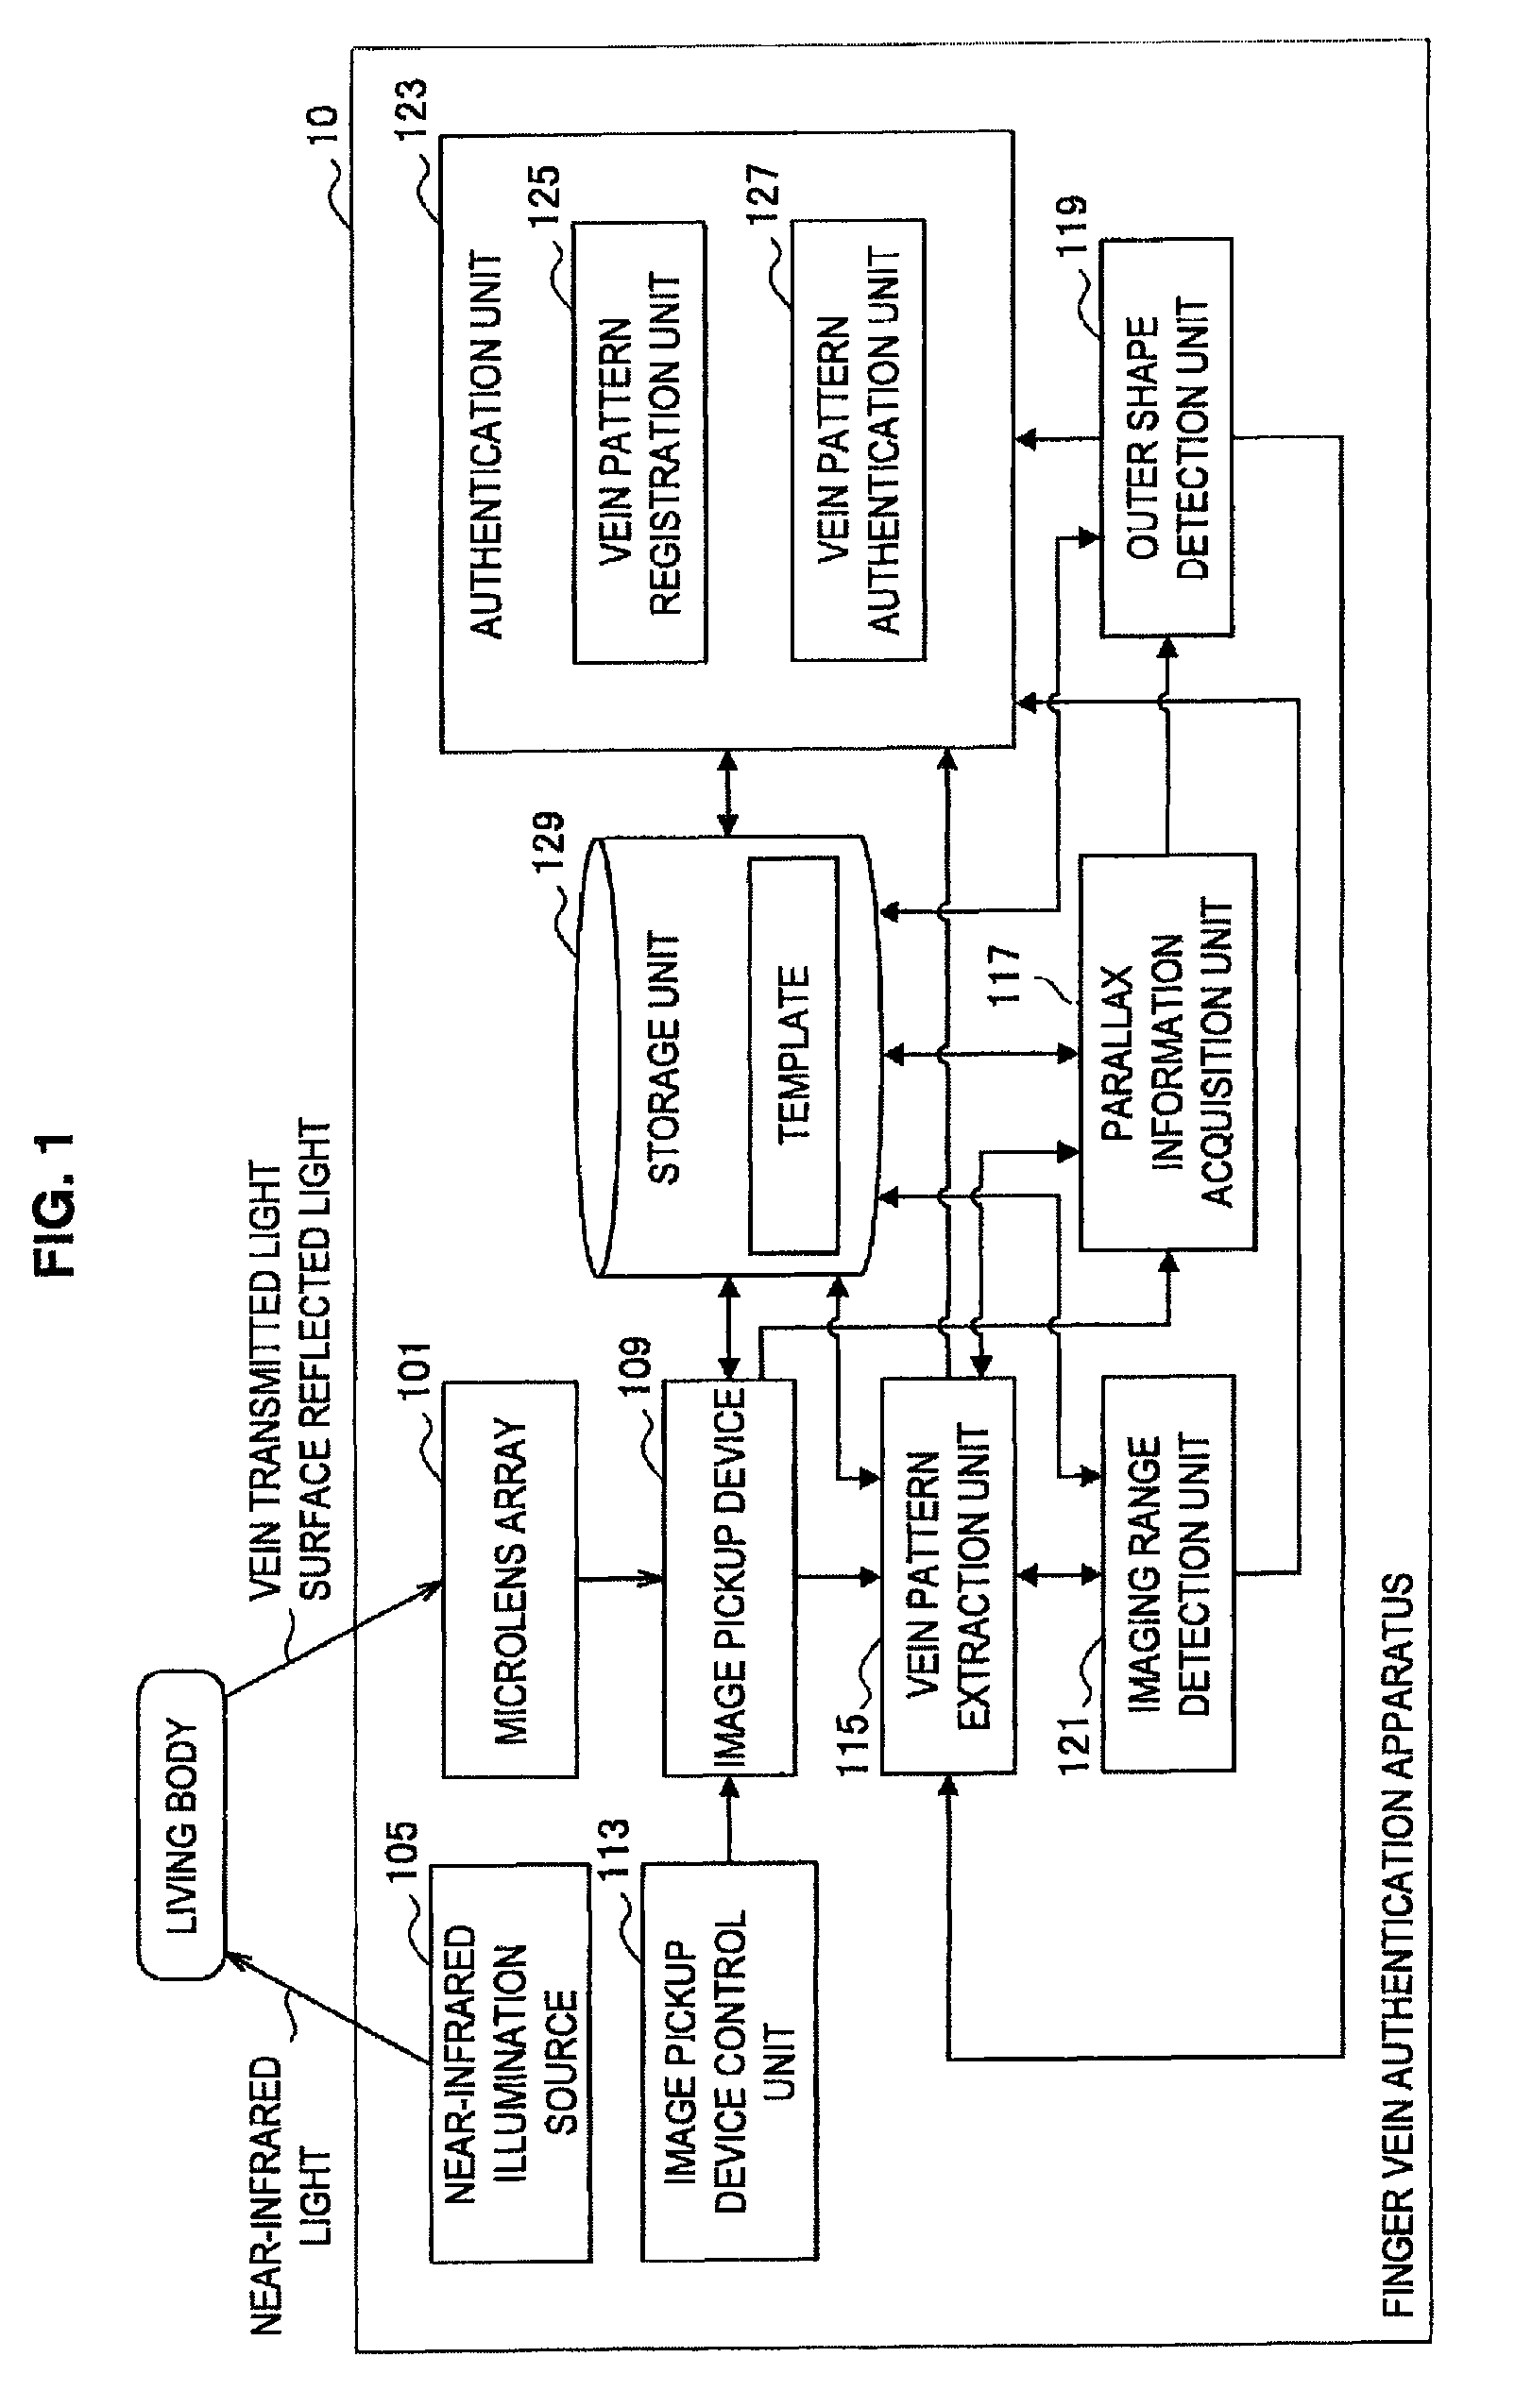 Finger vein authentication apparatus and finger vein authentication method